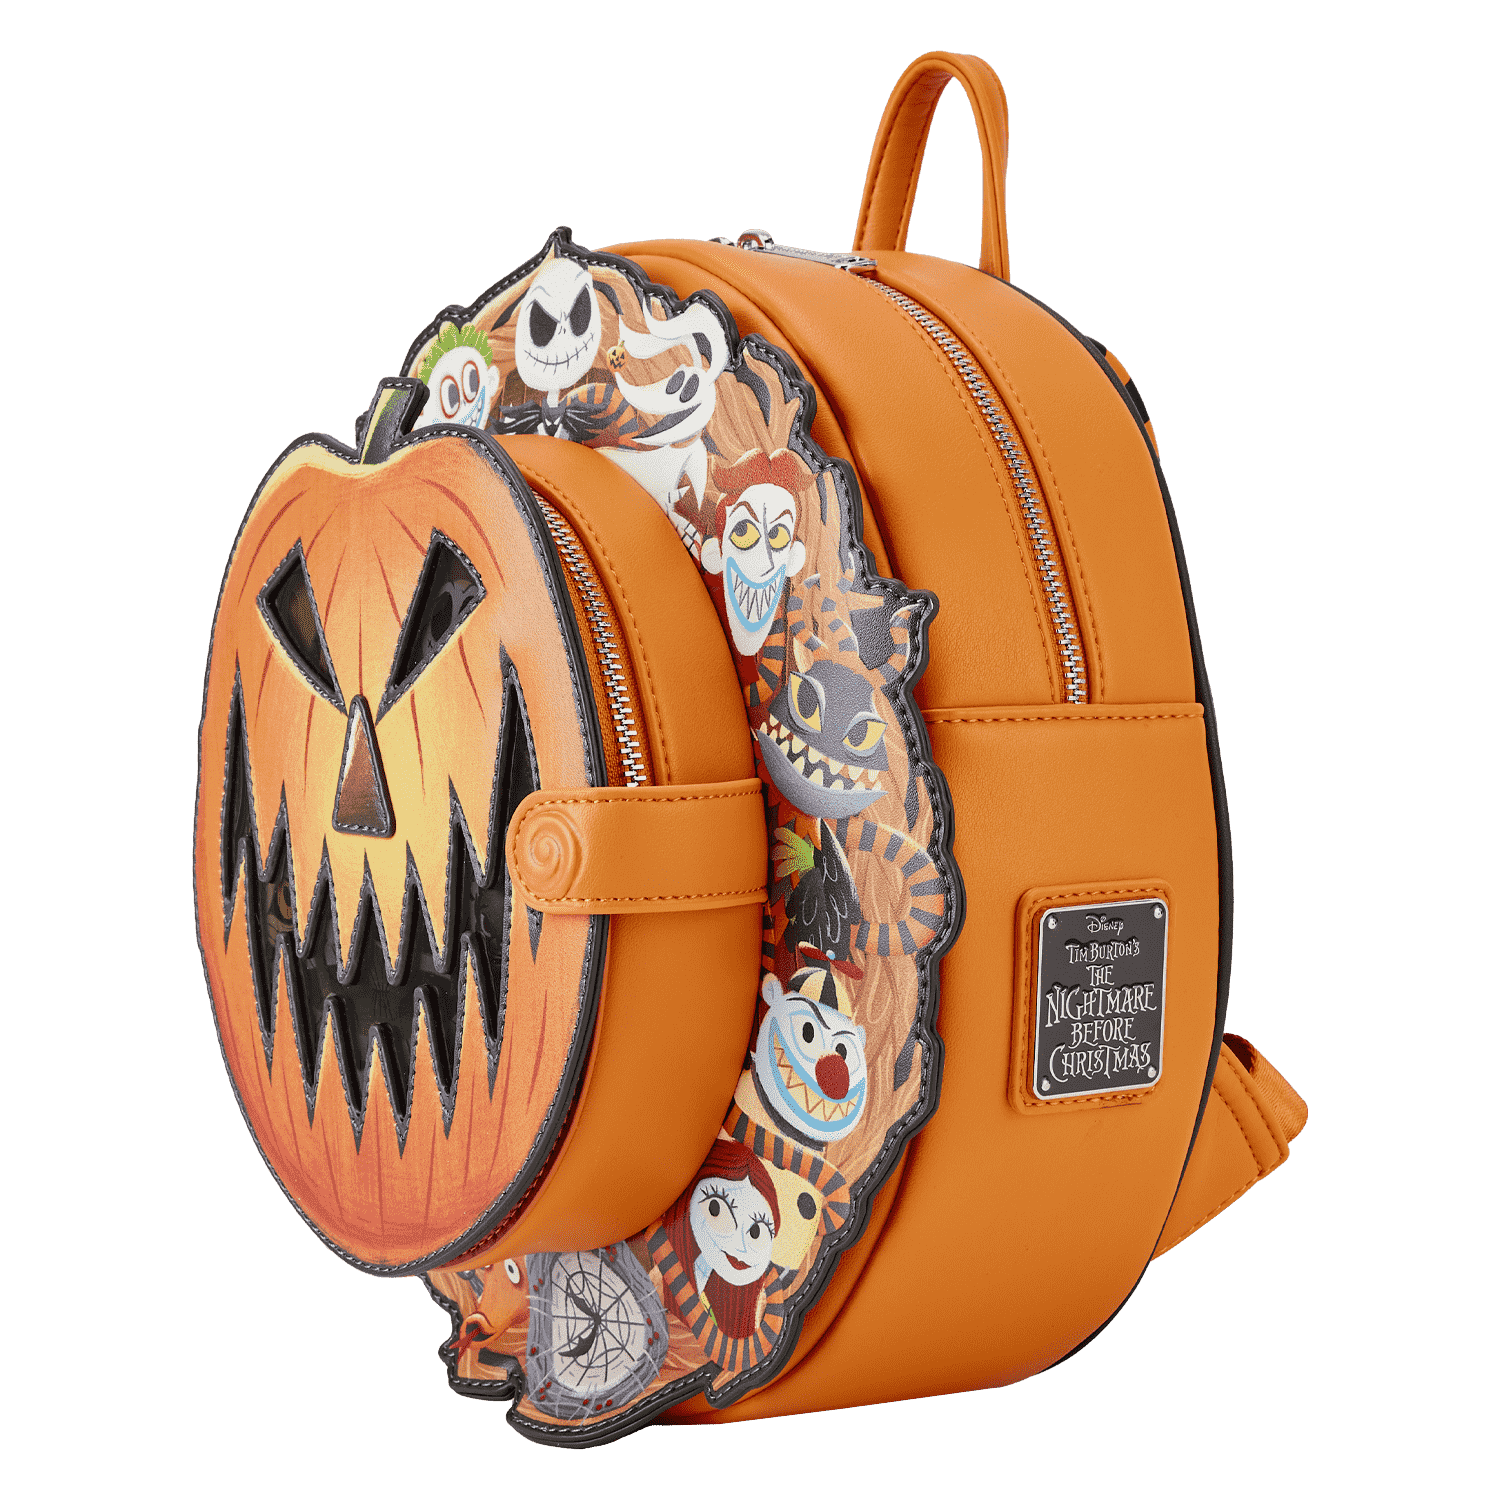 Buy Nightmare Before Christmas Exclusive Cameo Mini Backpack at Loungefly.